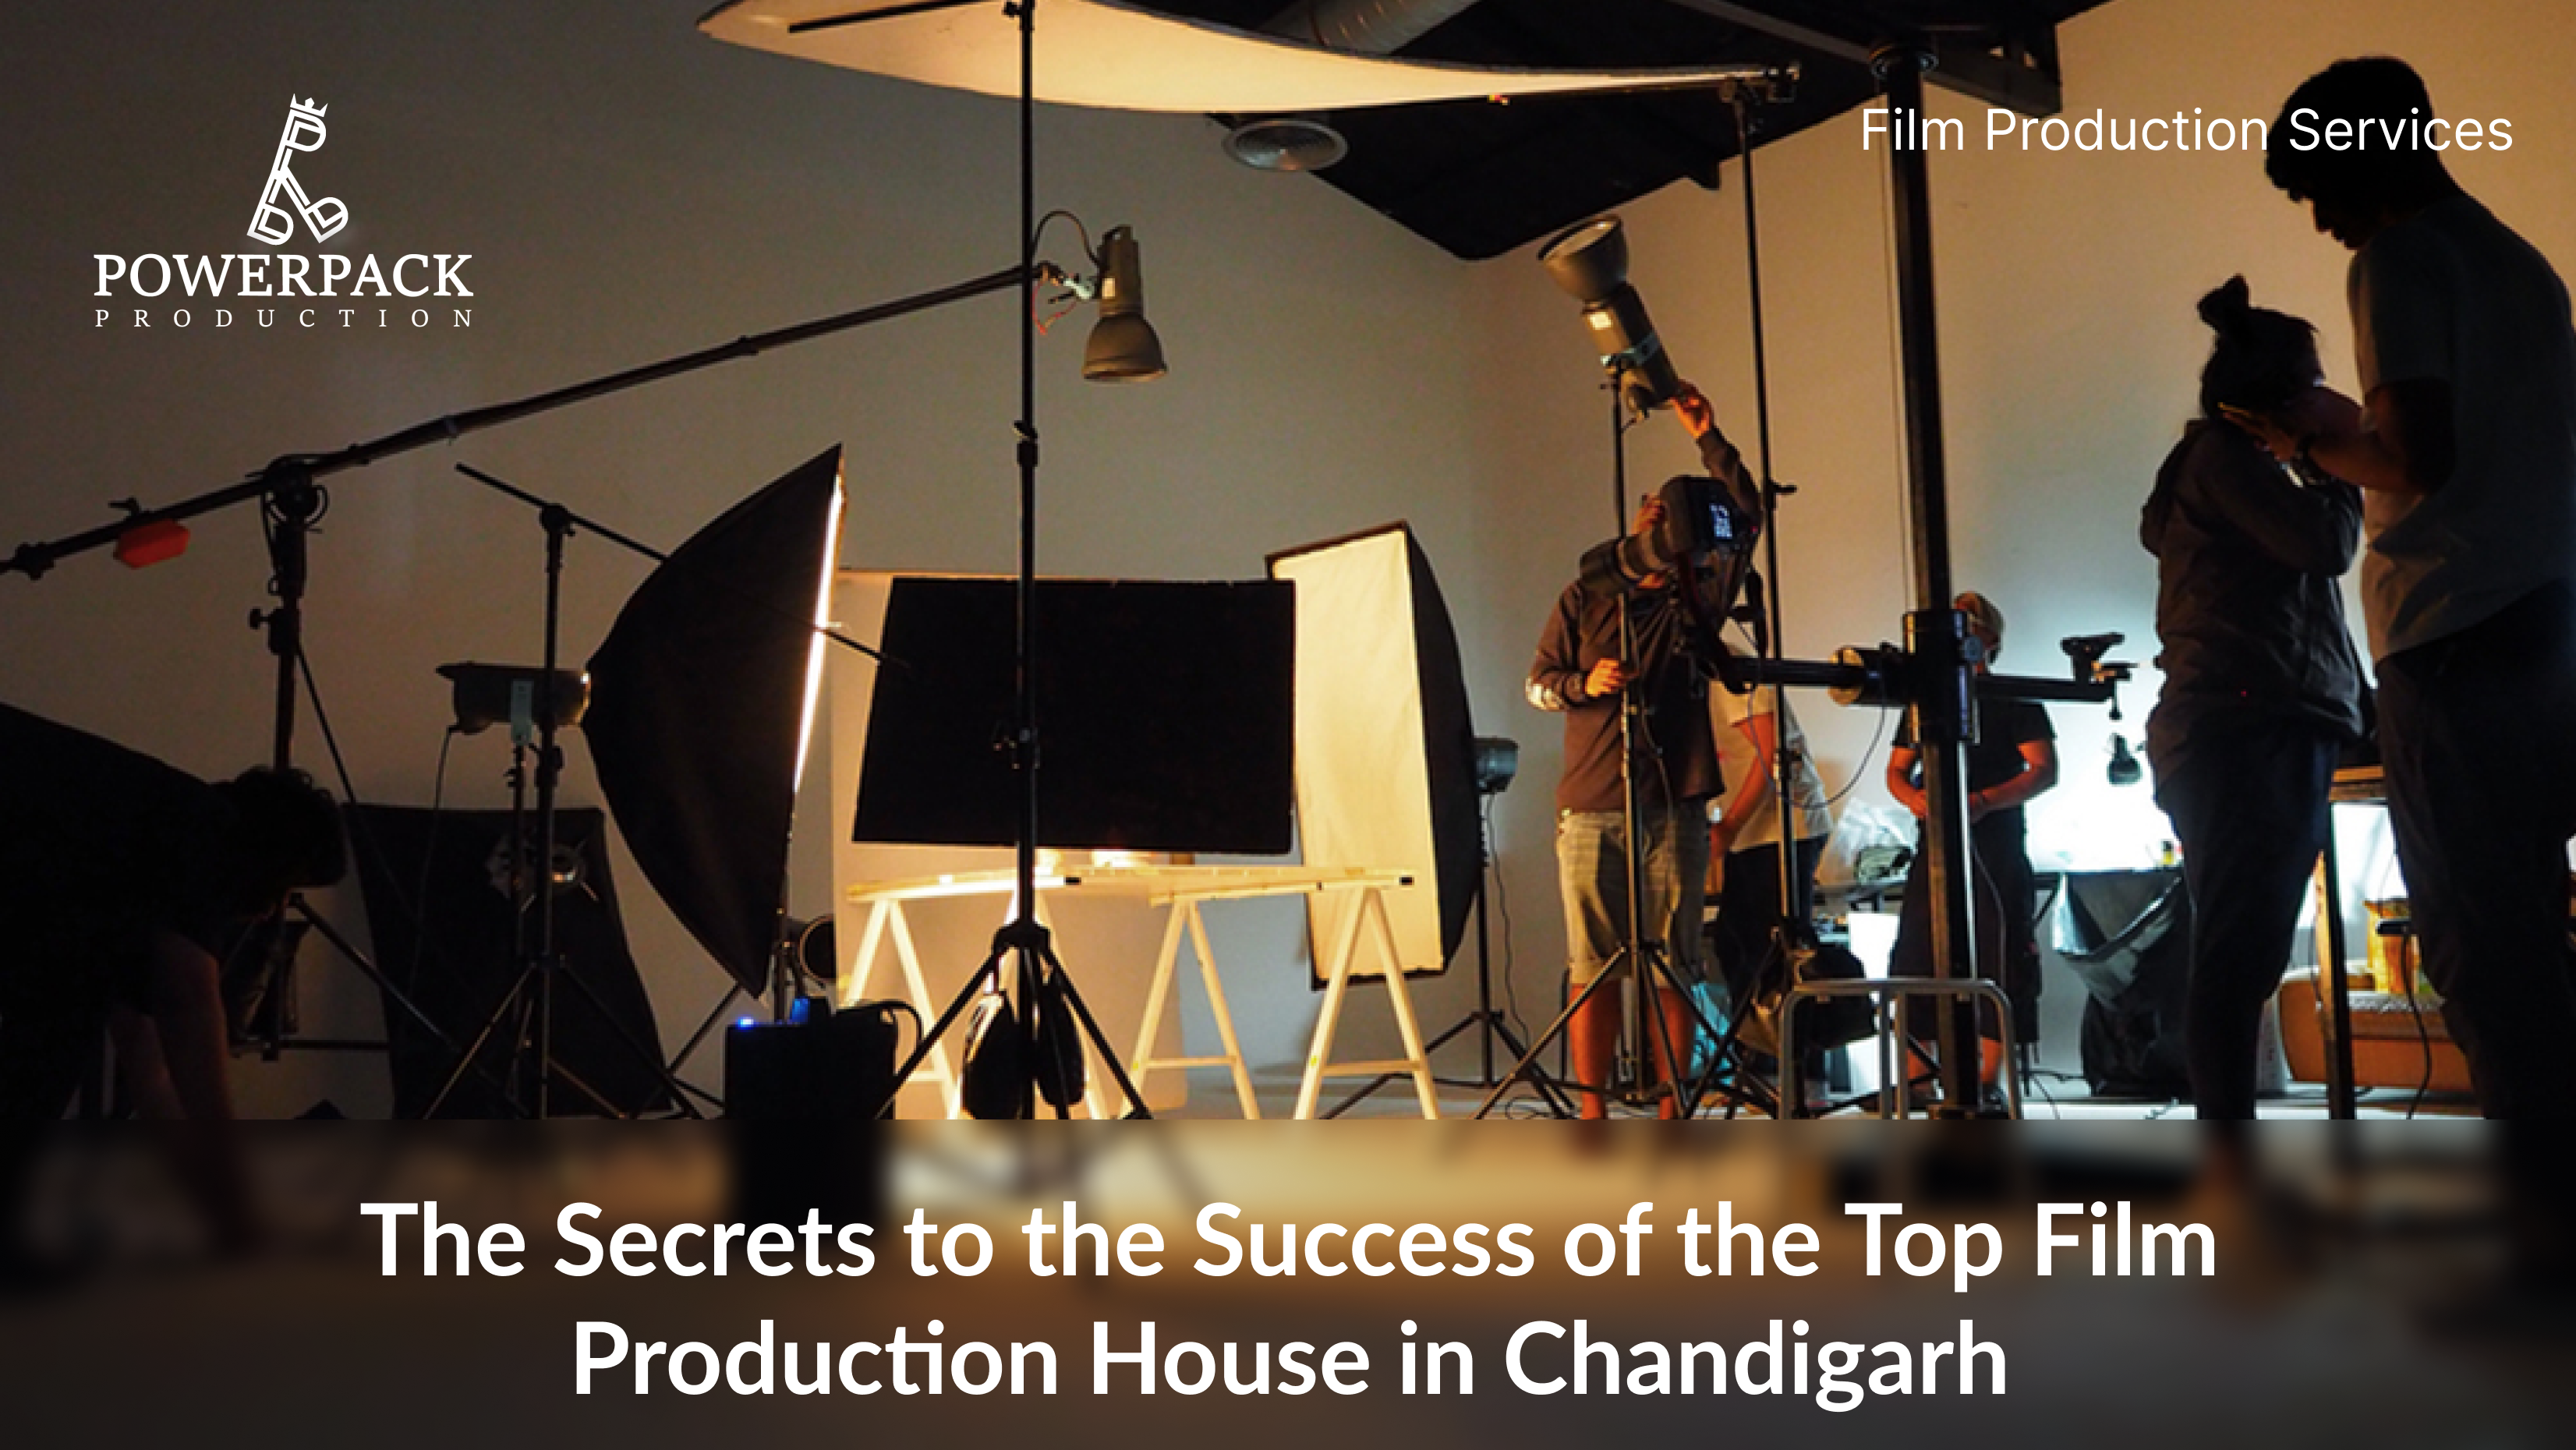 The Secrets to the Success of the Top Film Production House in Chandigarh